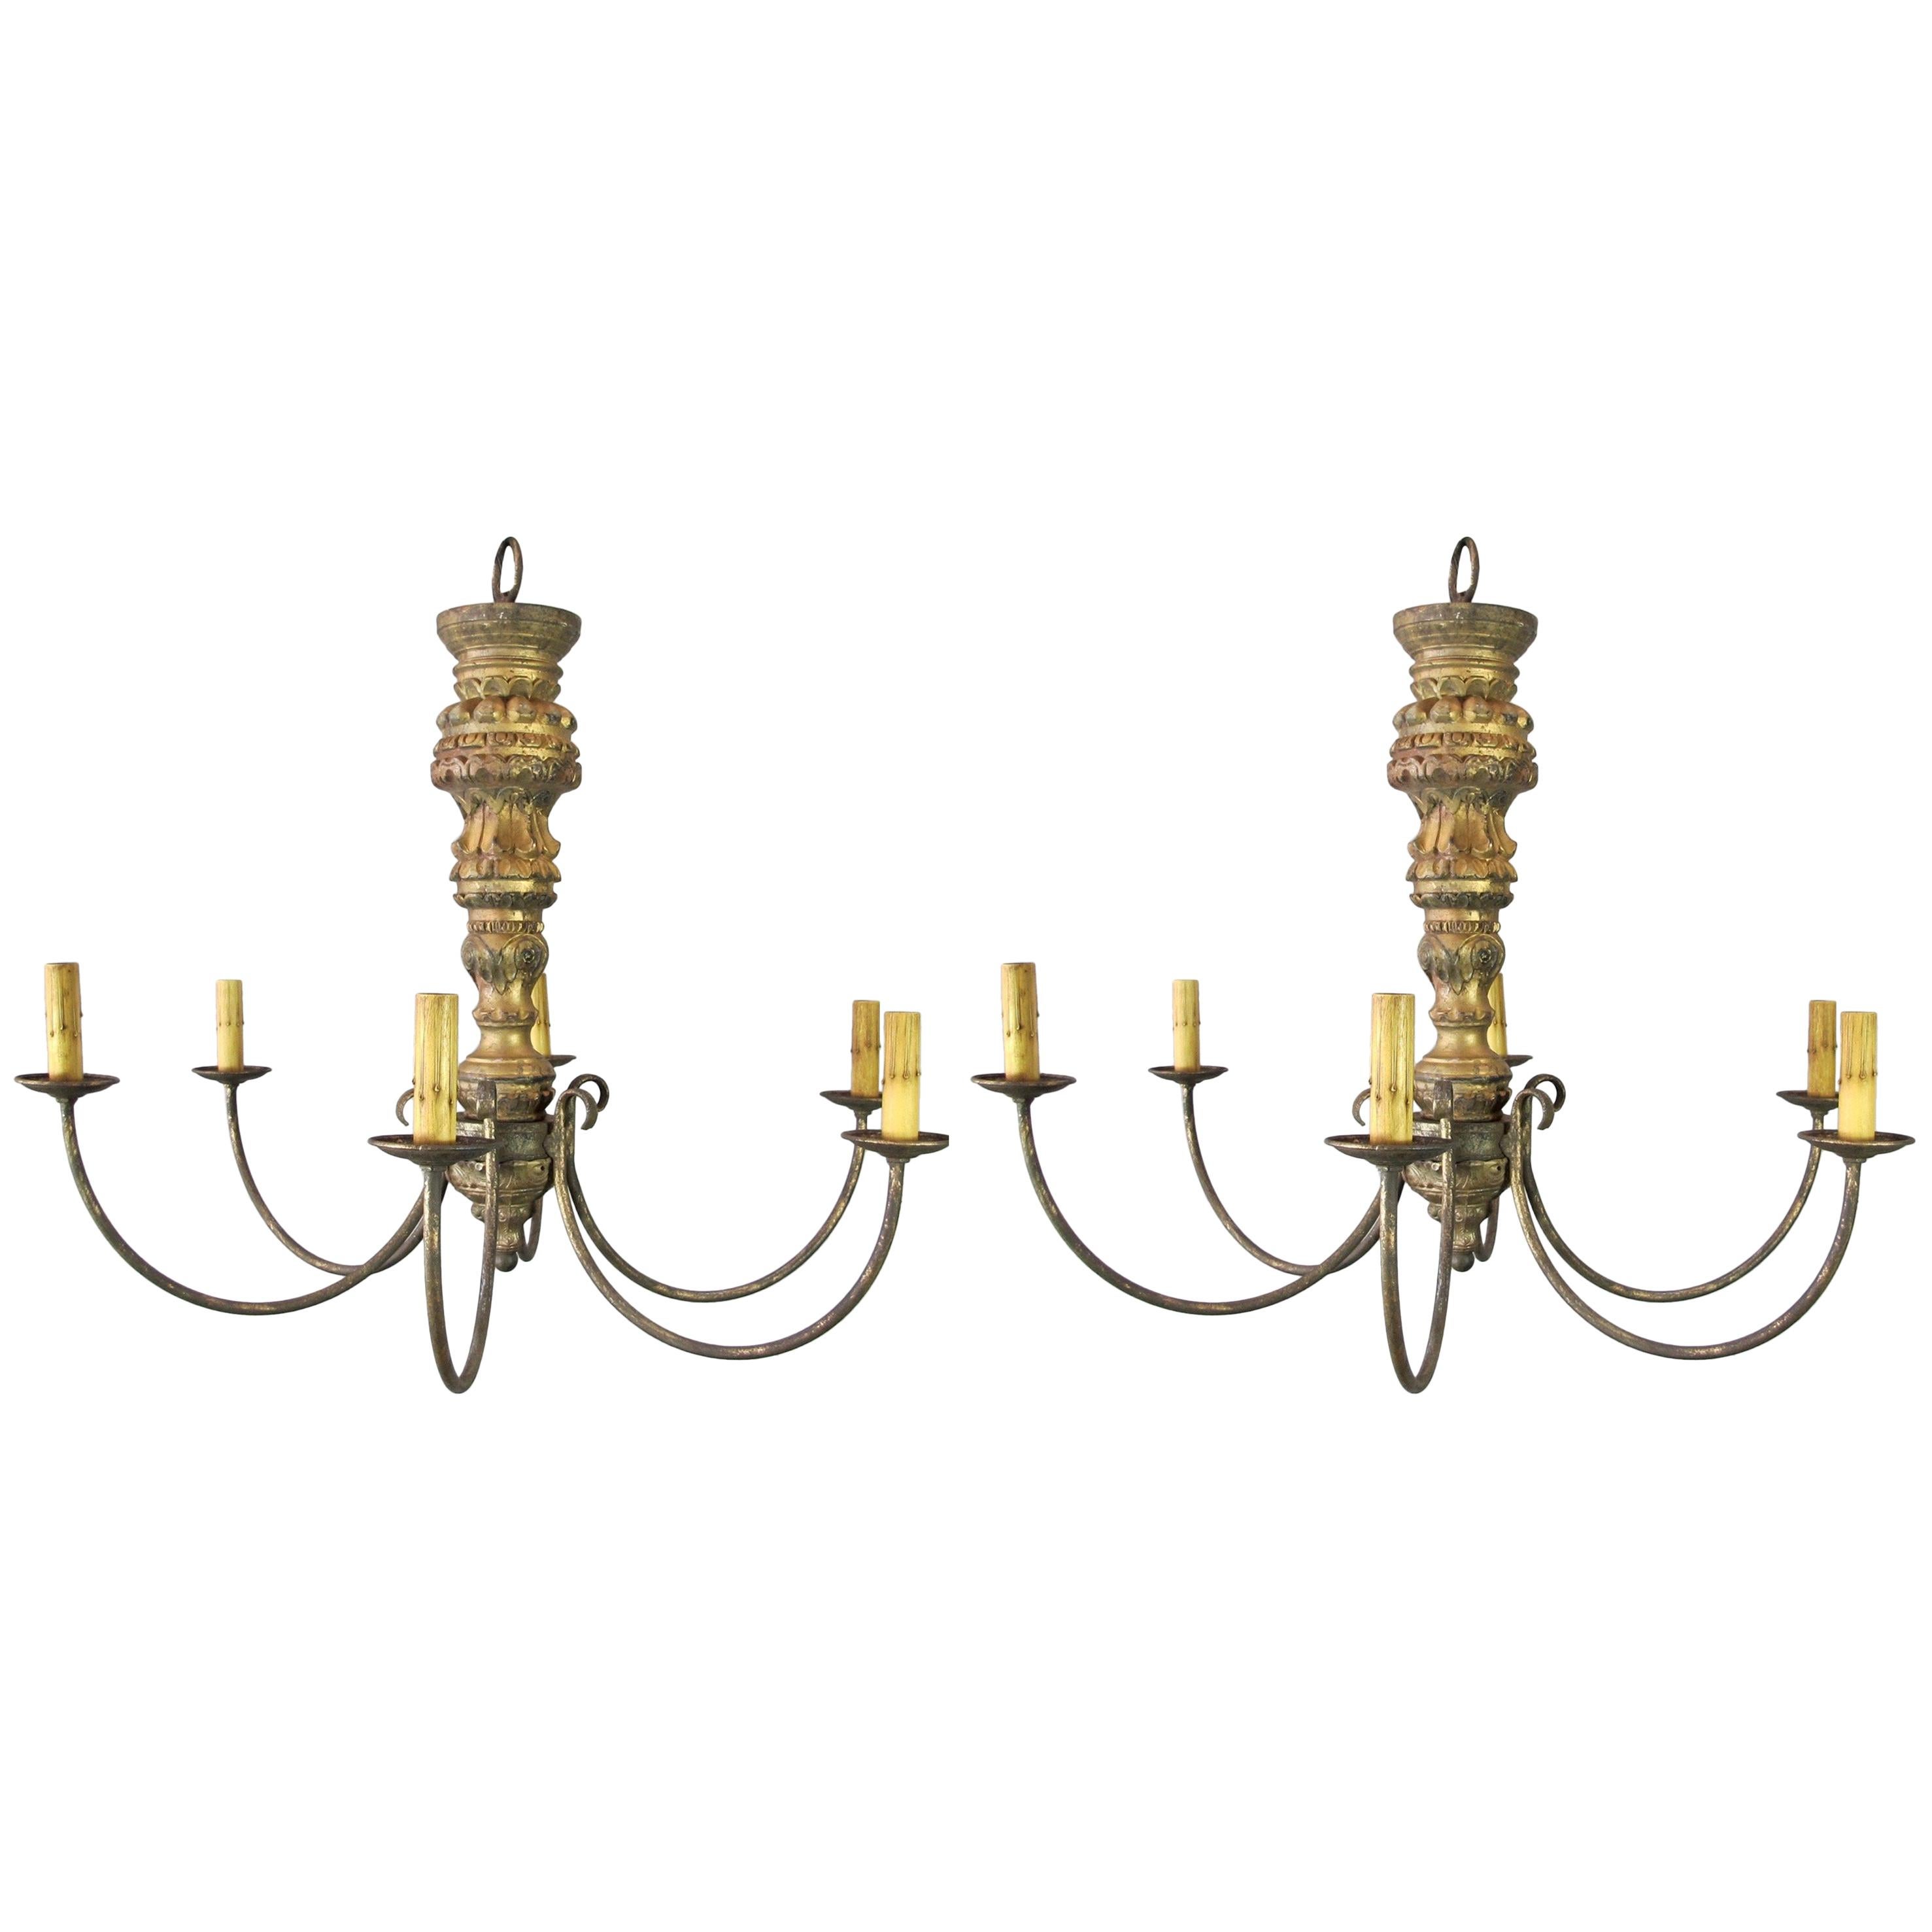 Pair of Carved Gilt Antique Candlestick Chandeliers